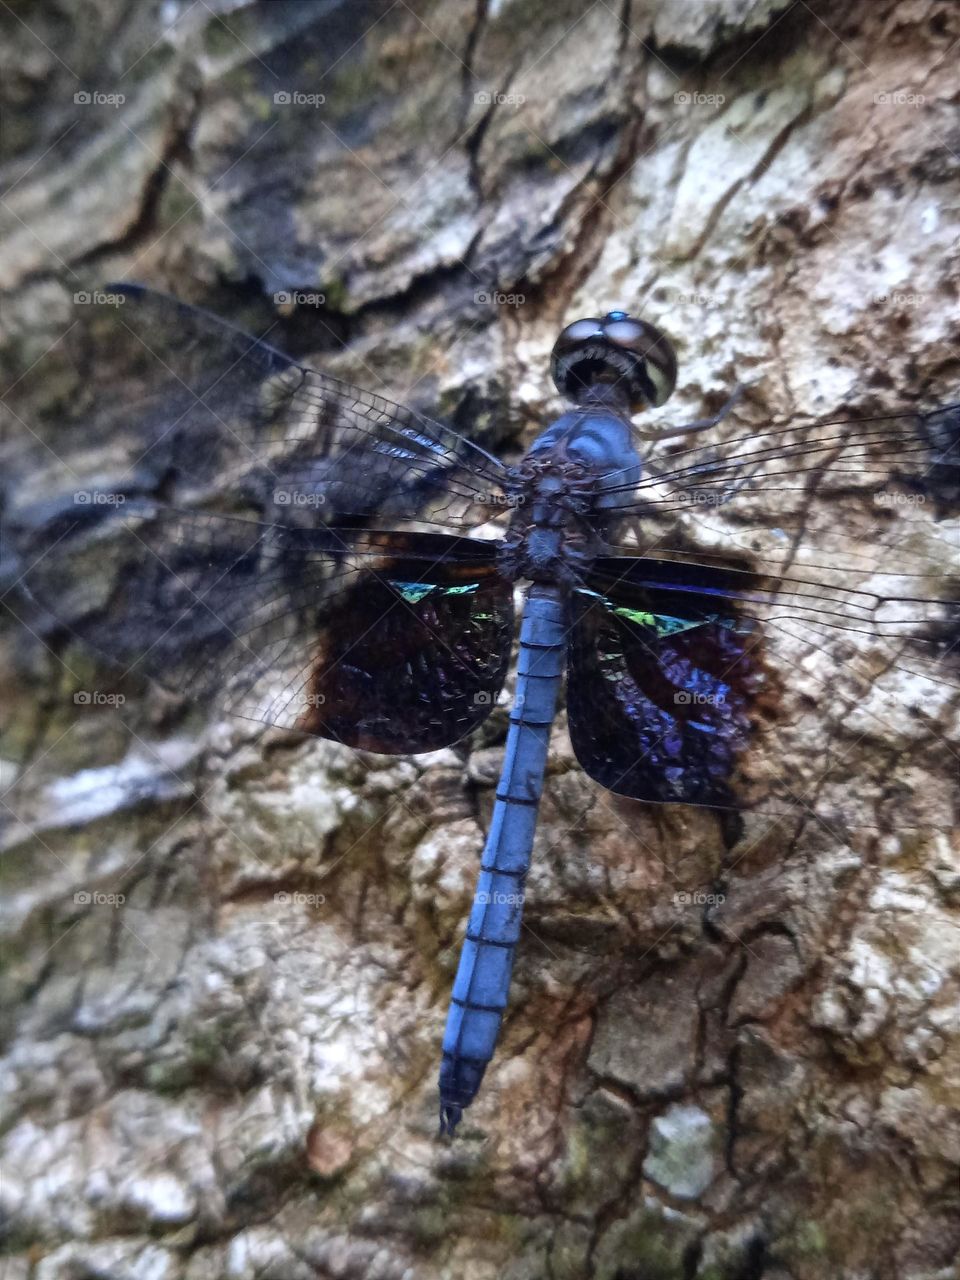 A blue dragonfly with the shinning wings.